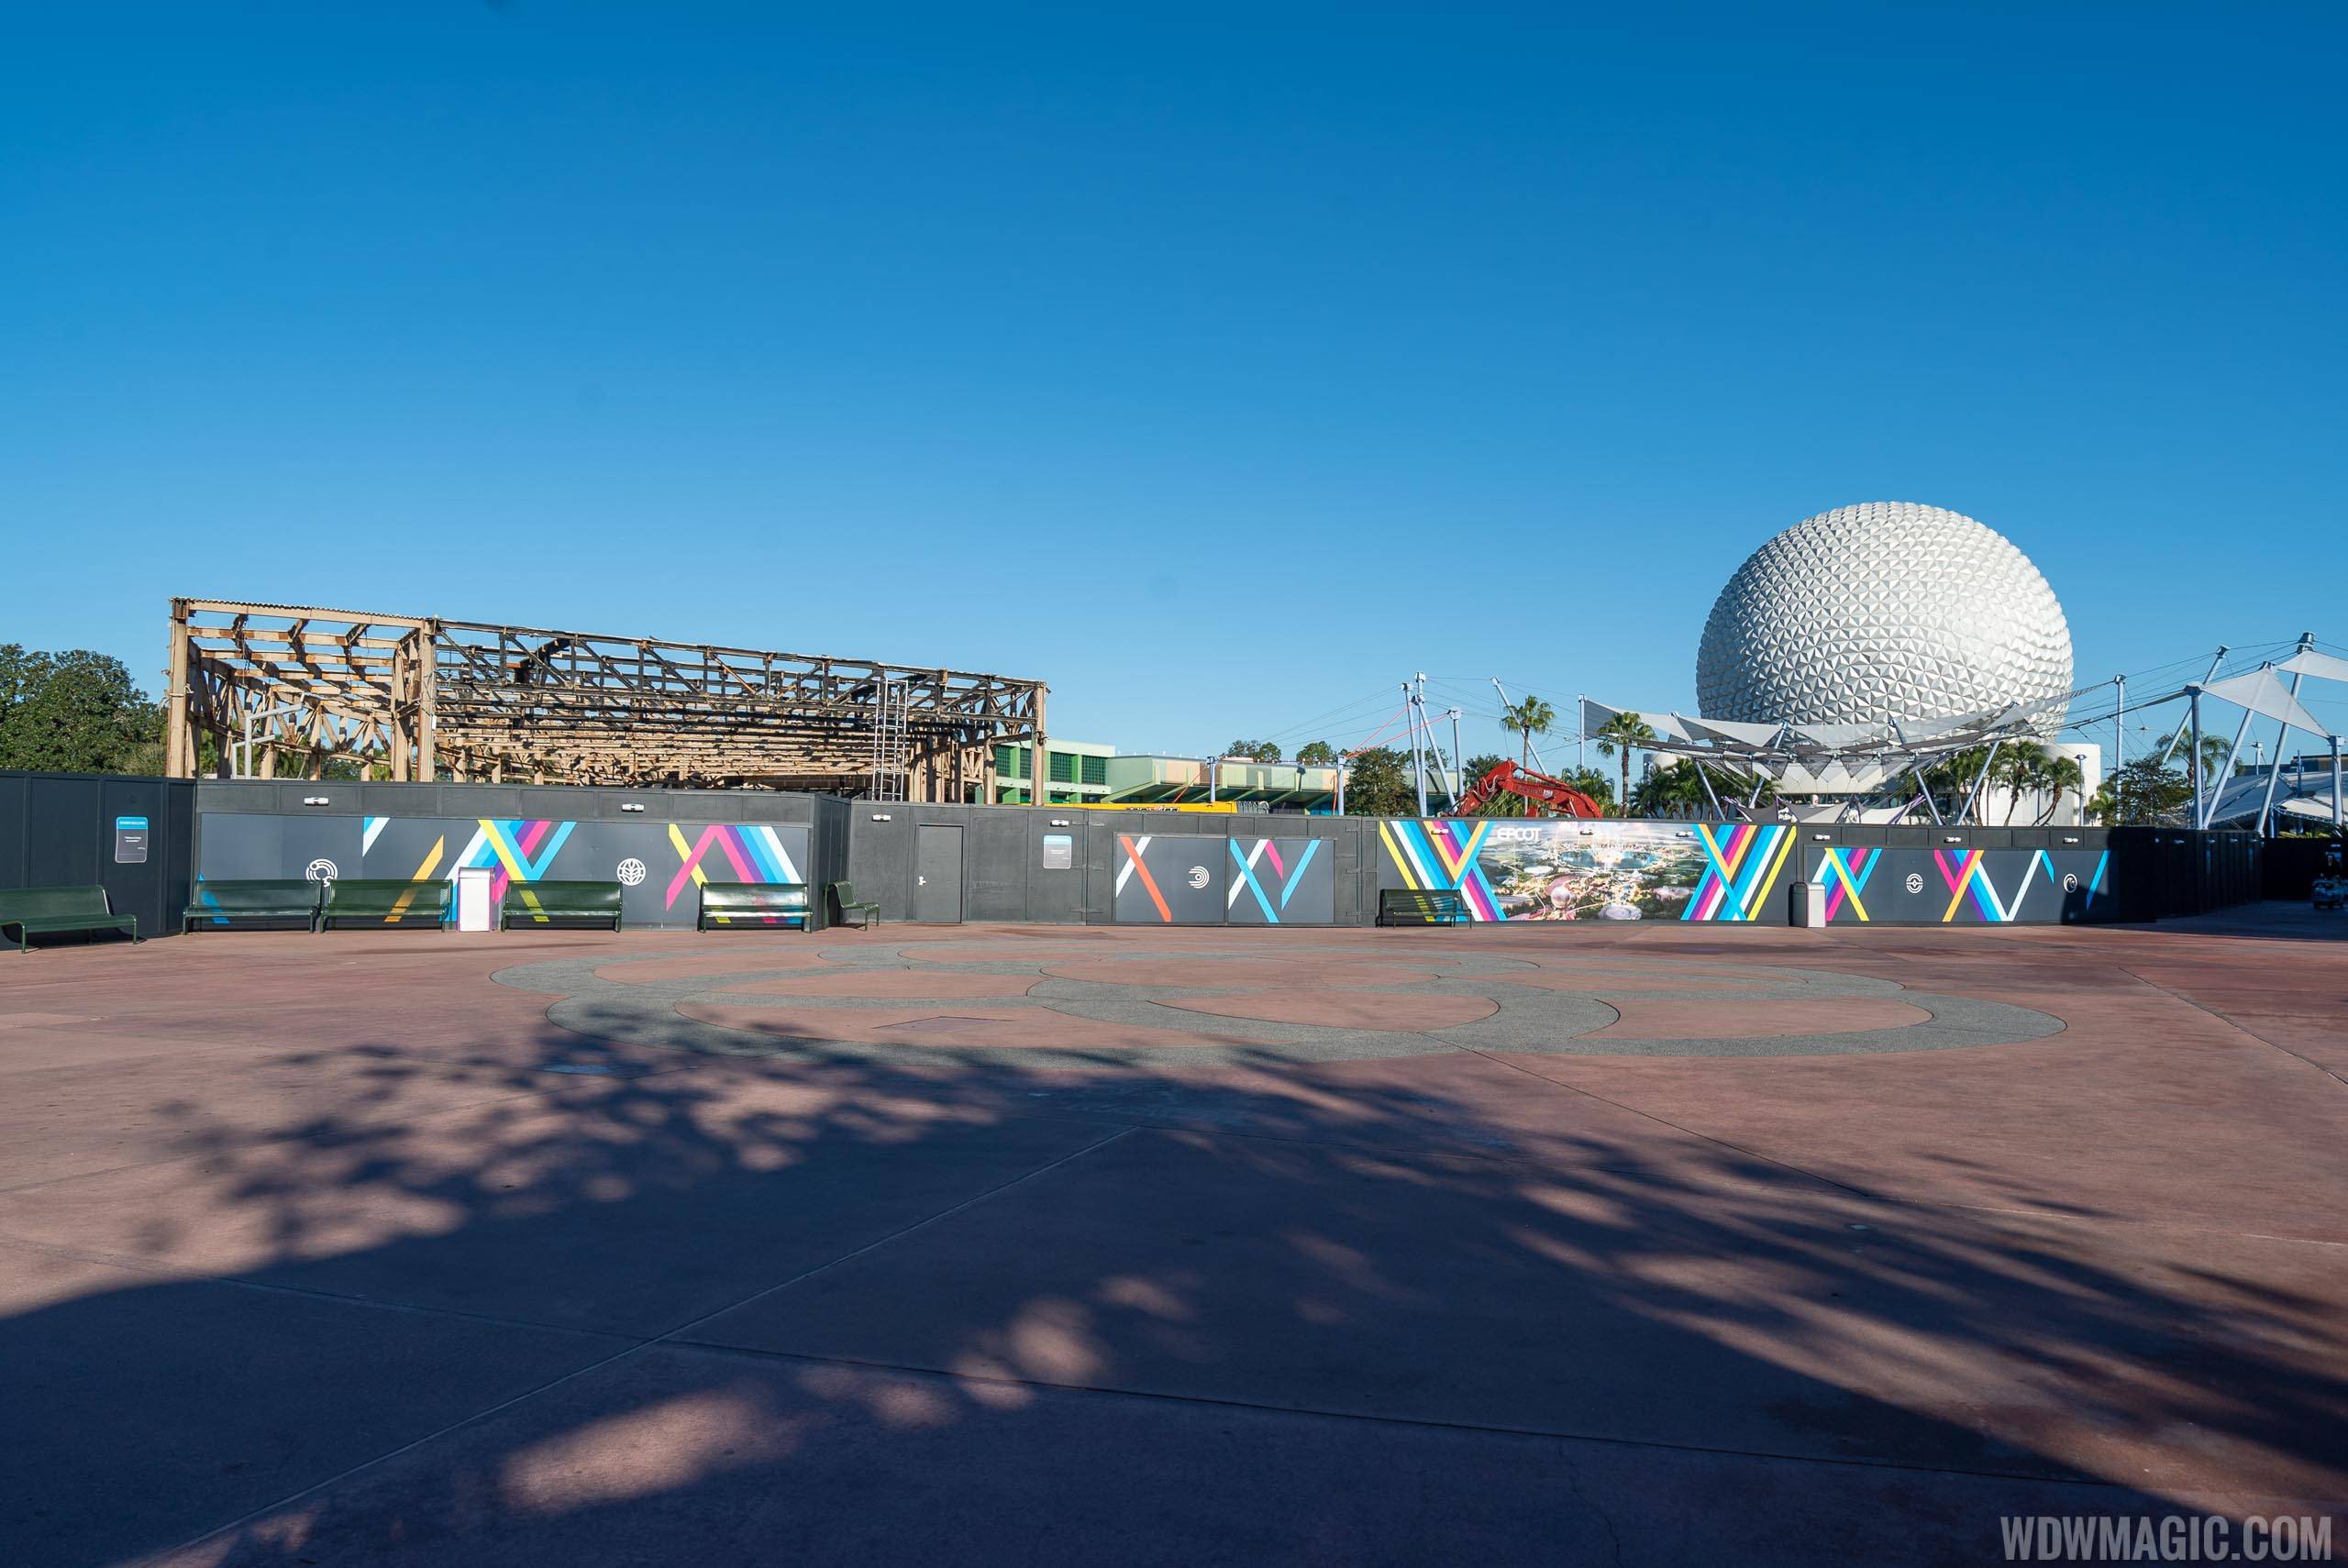 Epcot Future World West Demolition and Construction Walls - January 6 2020